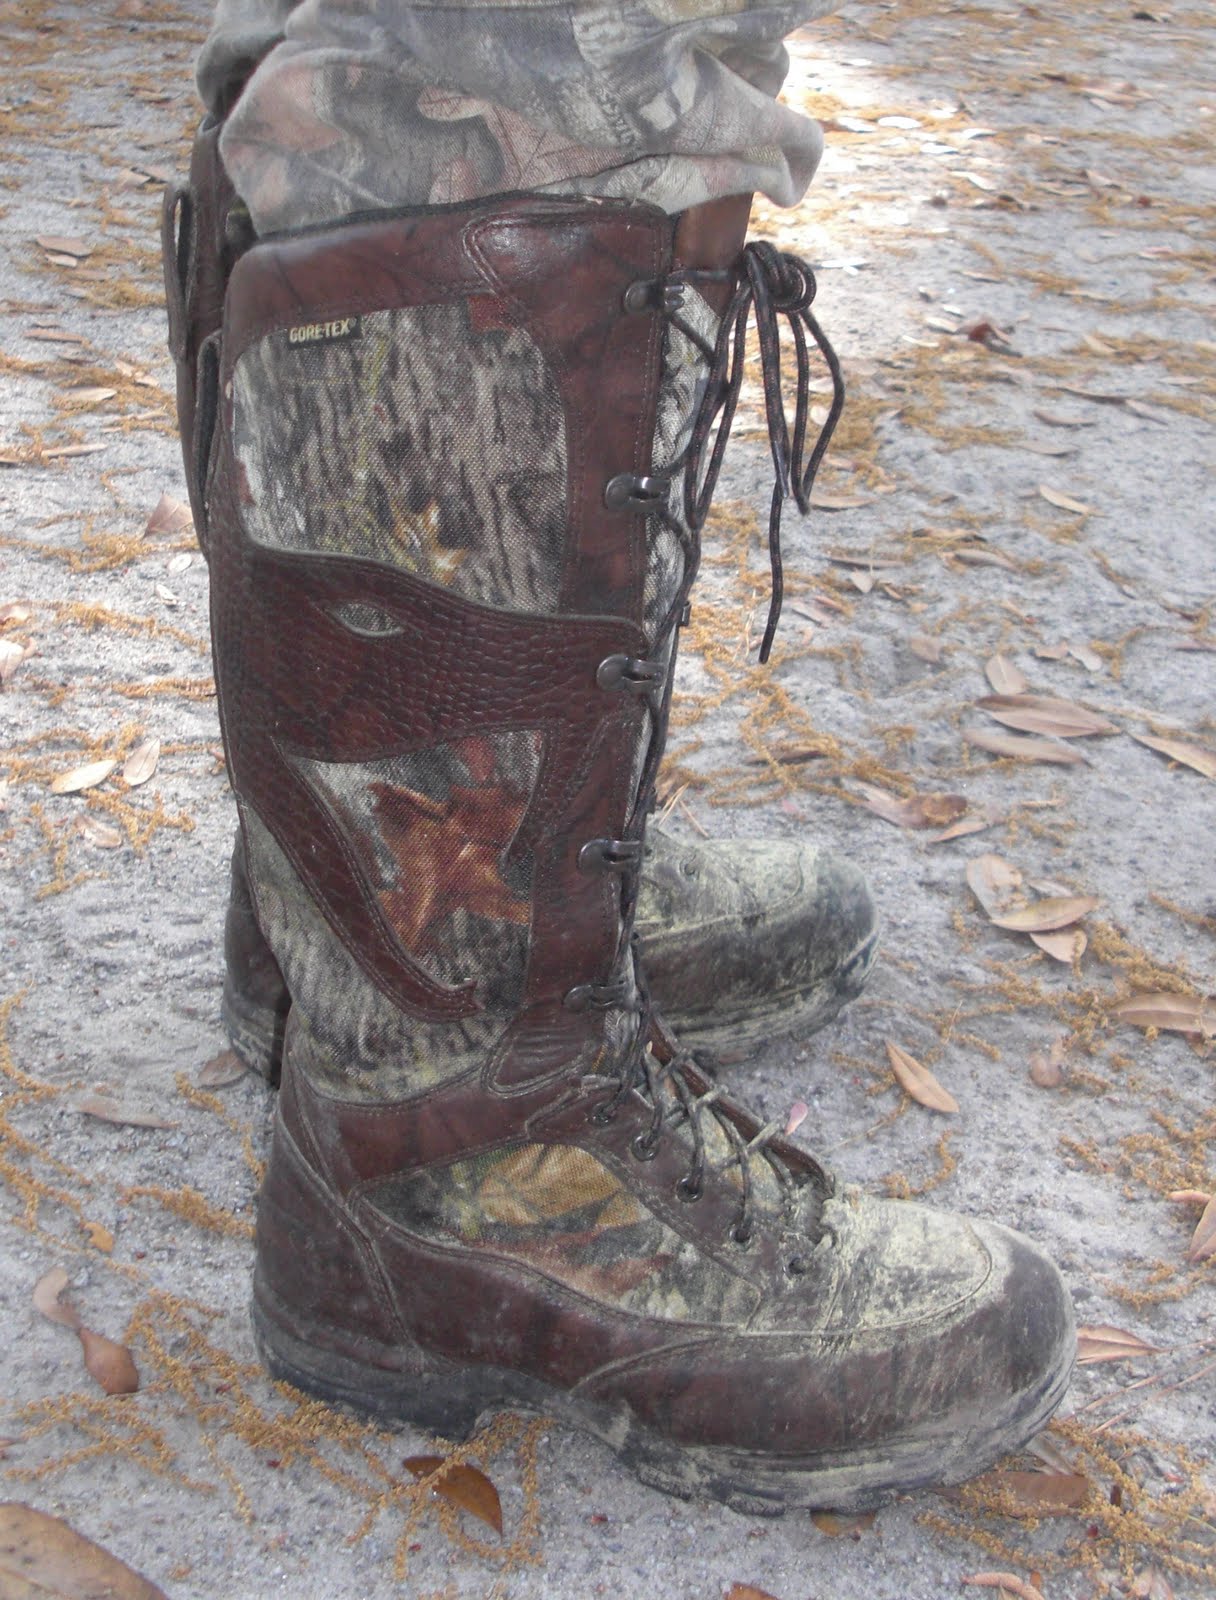 Lowcountry outdoors: Danner Pronghorn GTX boots - Video